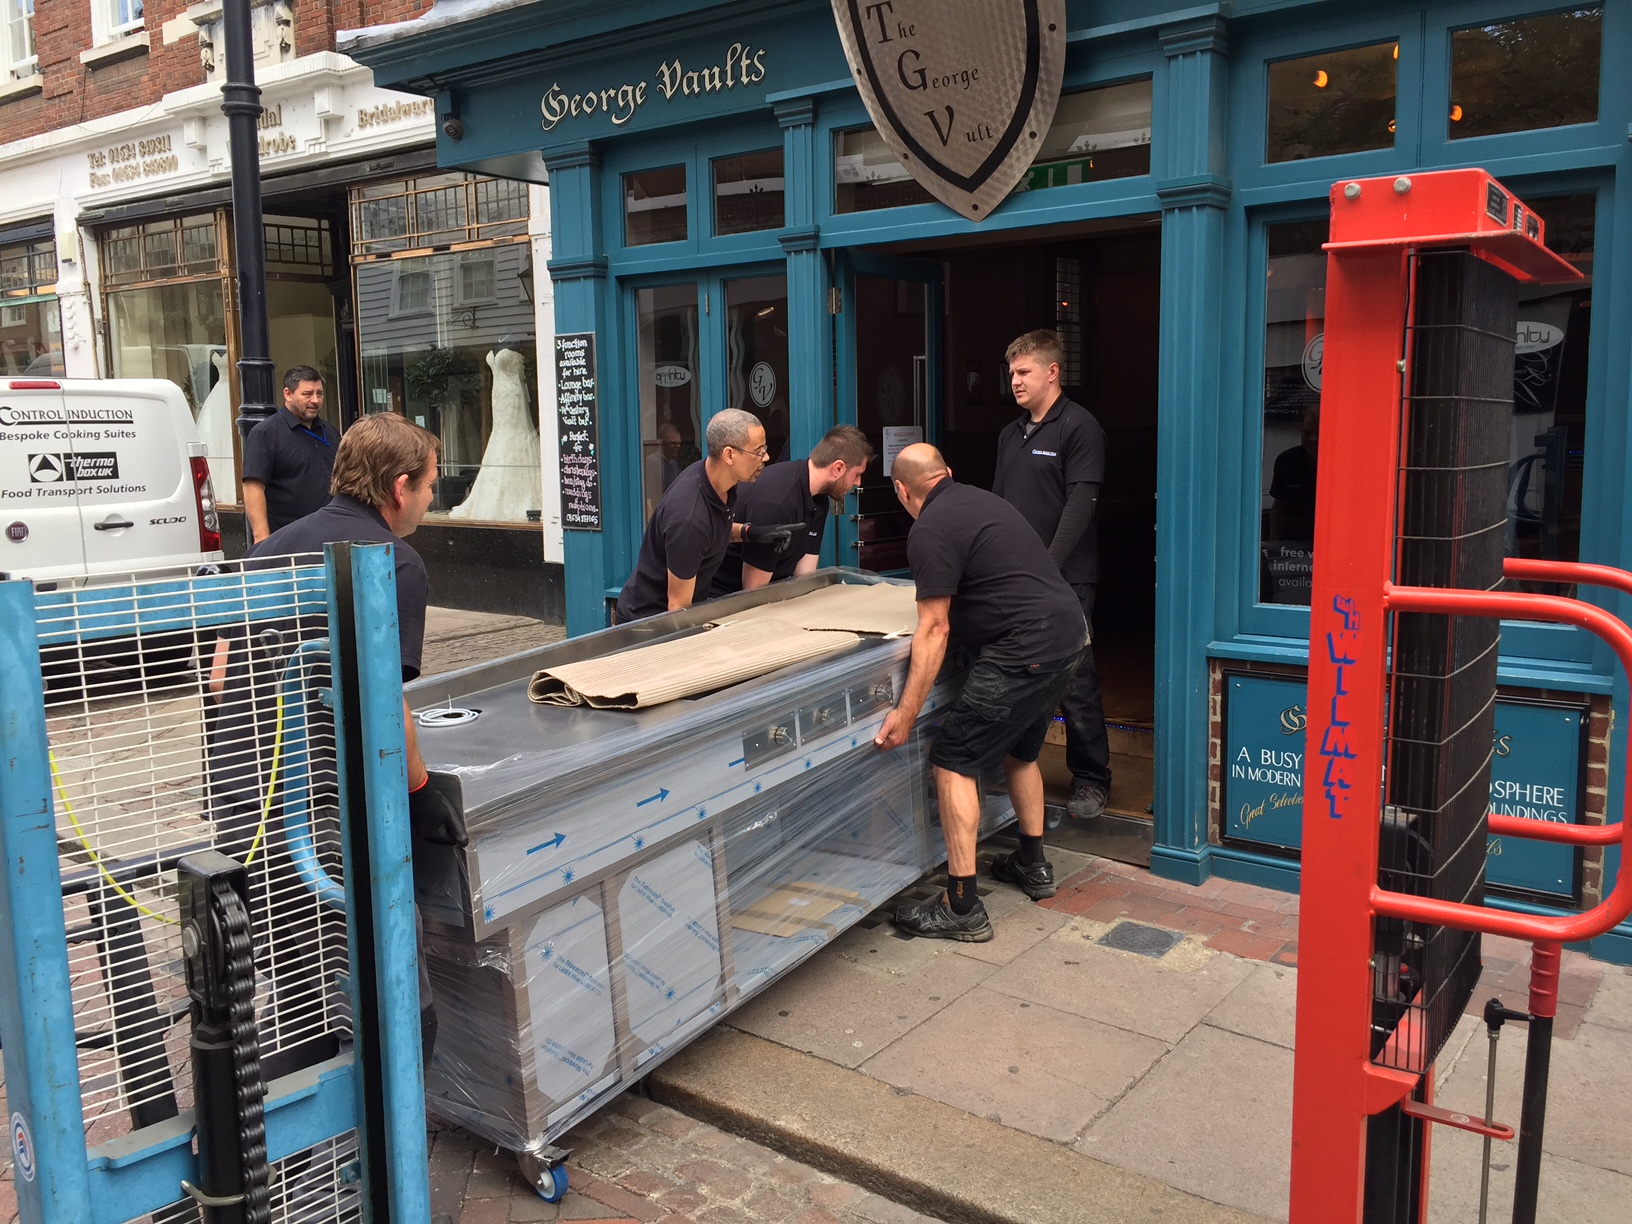 Induction cooker unloaded and being wheeled into the restaurant